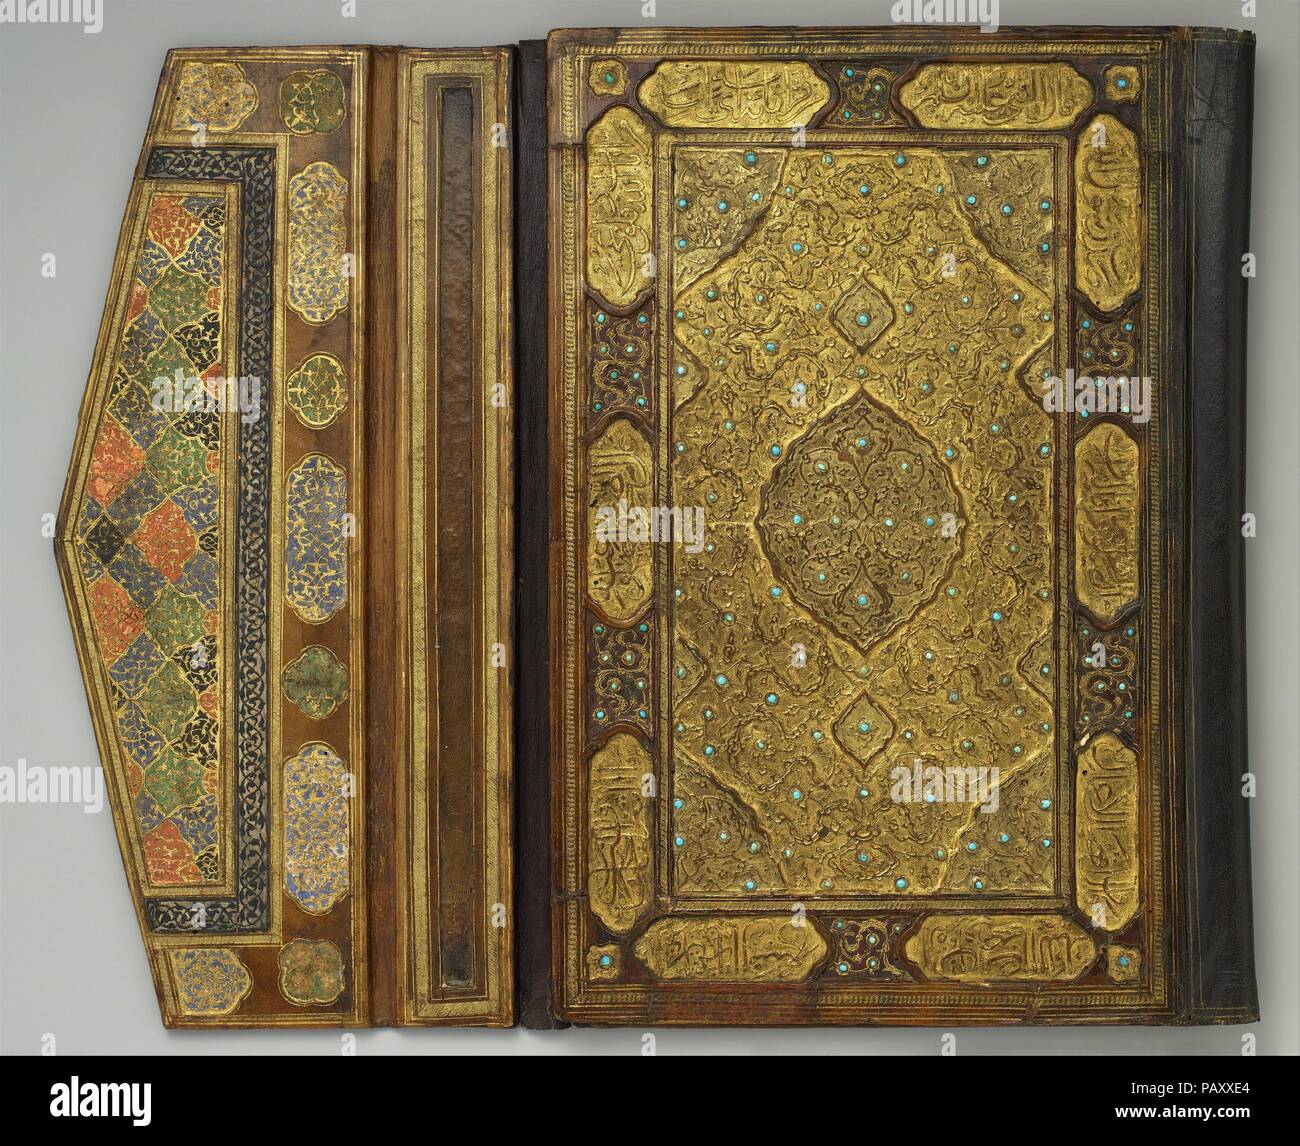 Qur'an Bookbinding Inset with Turquoise. Dimensions: H. 14 in. (35.6 cm)  W. (closed) 10 in. (25.4 cm)  W. (open) 27 in. (68.6 cm)  D. 1 1/2 in. (3.8 cm). Date: 16th century.  The stamped and gilded techniques used for this leather binding were common in the Middle East, especially in Iran where the art first developed, and in Turkey, where it was perfected. Central almond-shaped medallions and concave fillings in the four corners are common features of Islamic books. Ottoman book covers with this kind of composition and floral design served as models for a great number of Venetian Renaissance Stock Photo